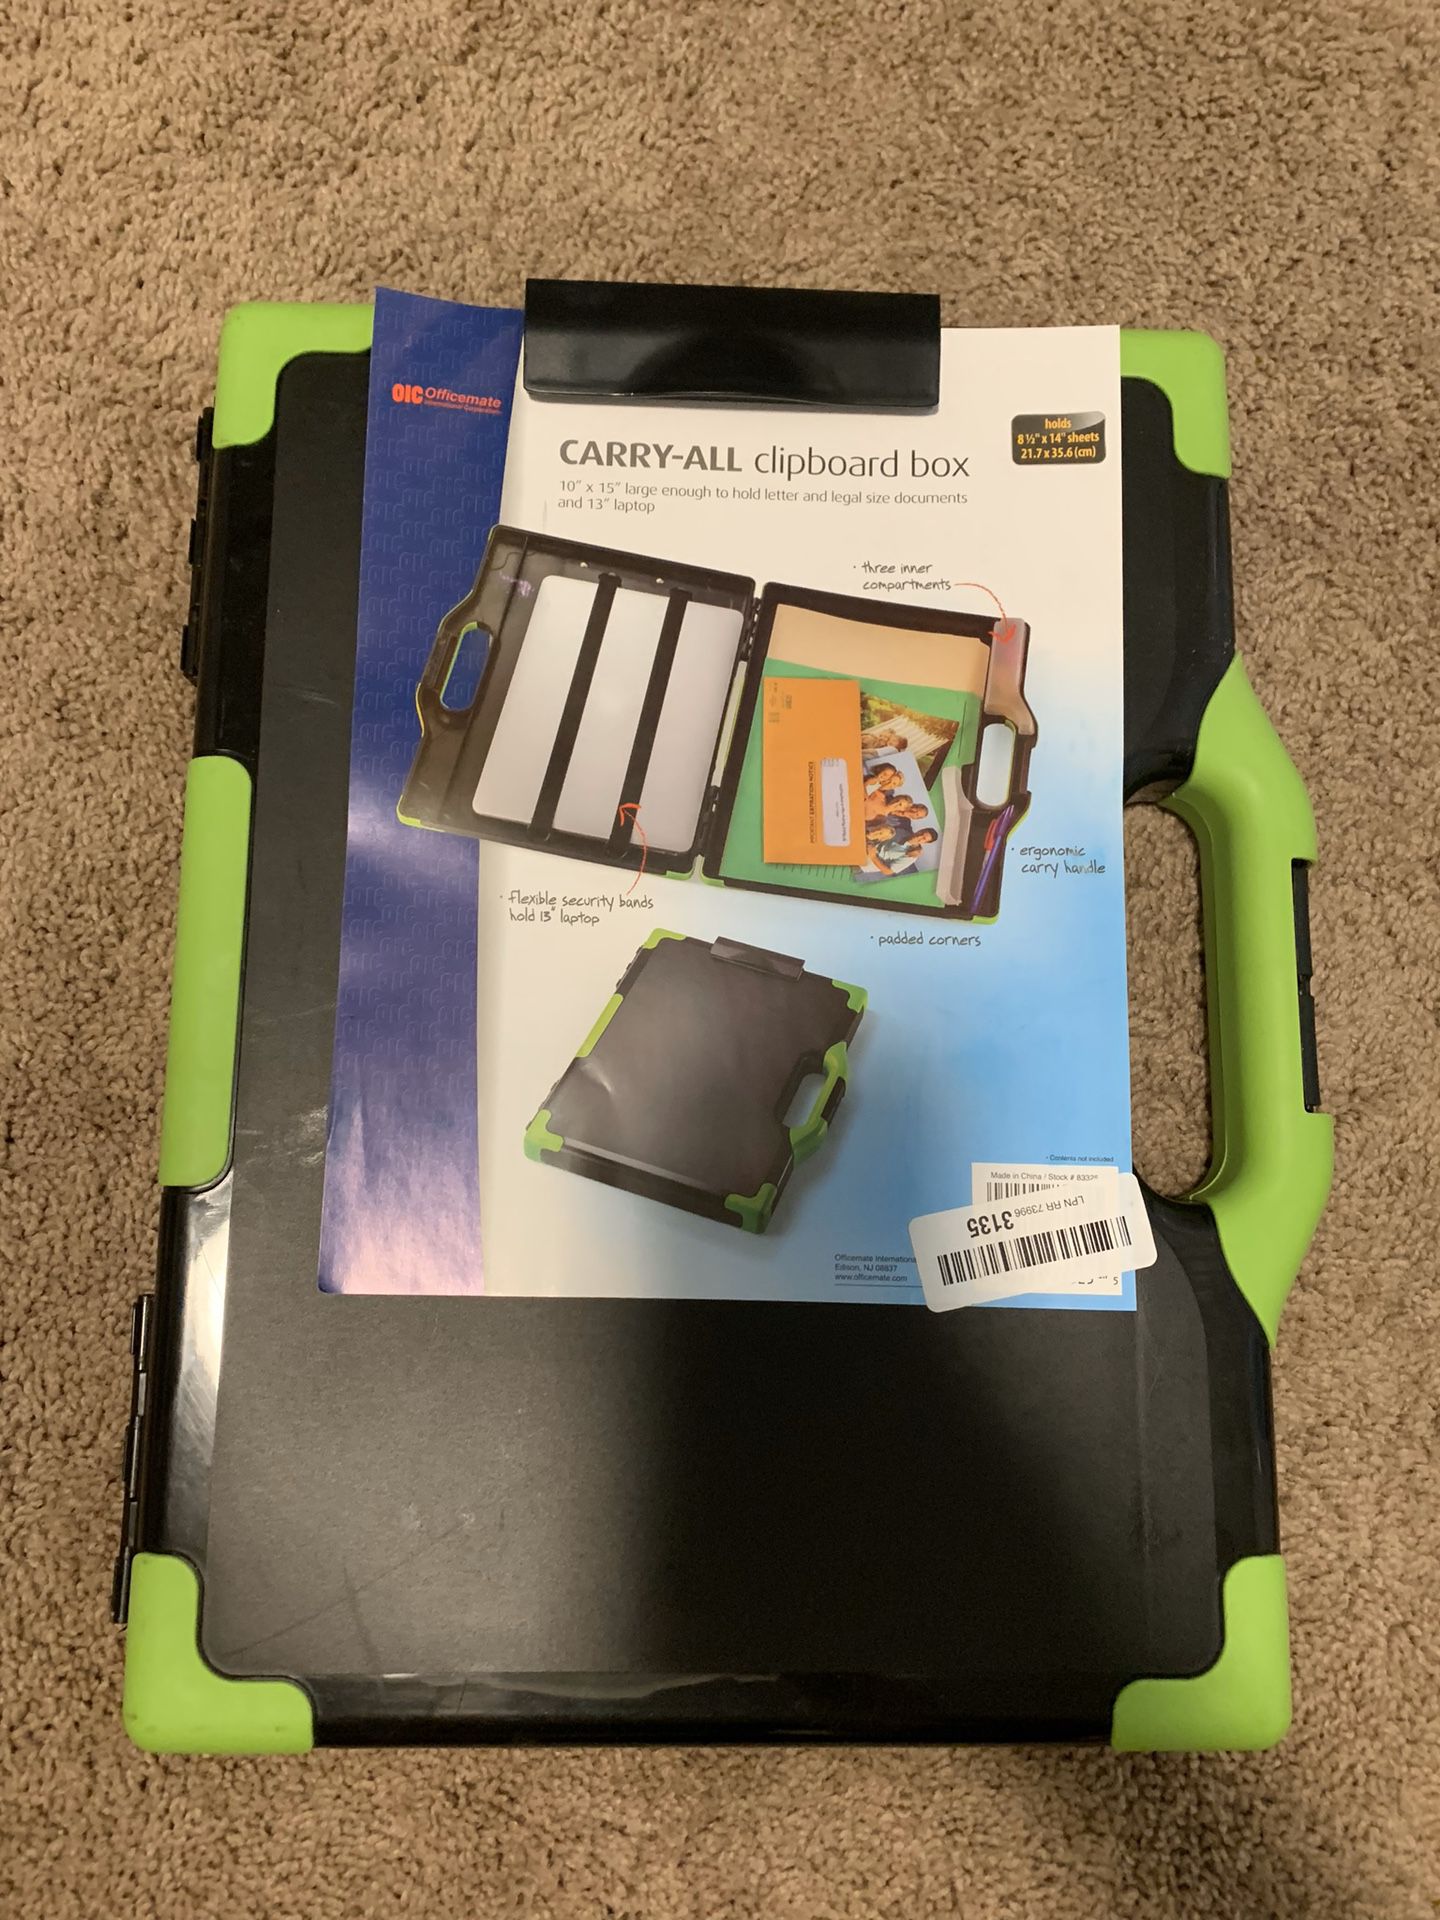 Brand new Carry-all Clipboard box/briefcase